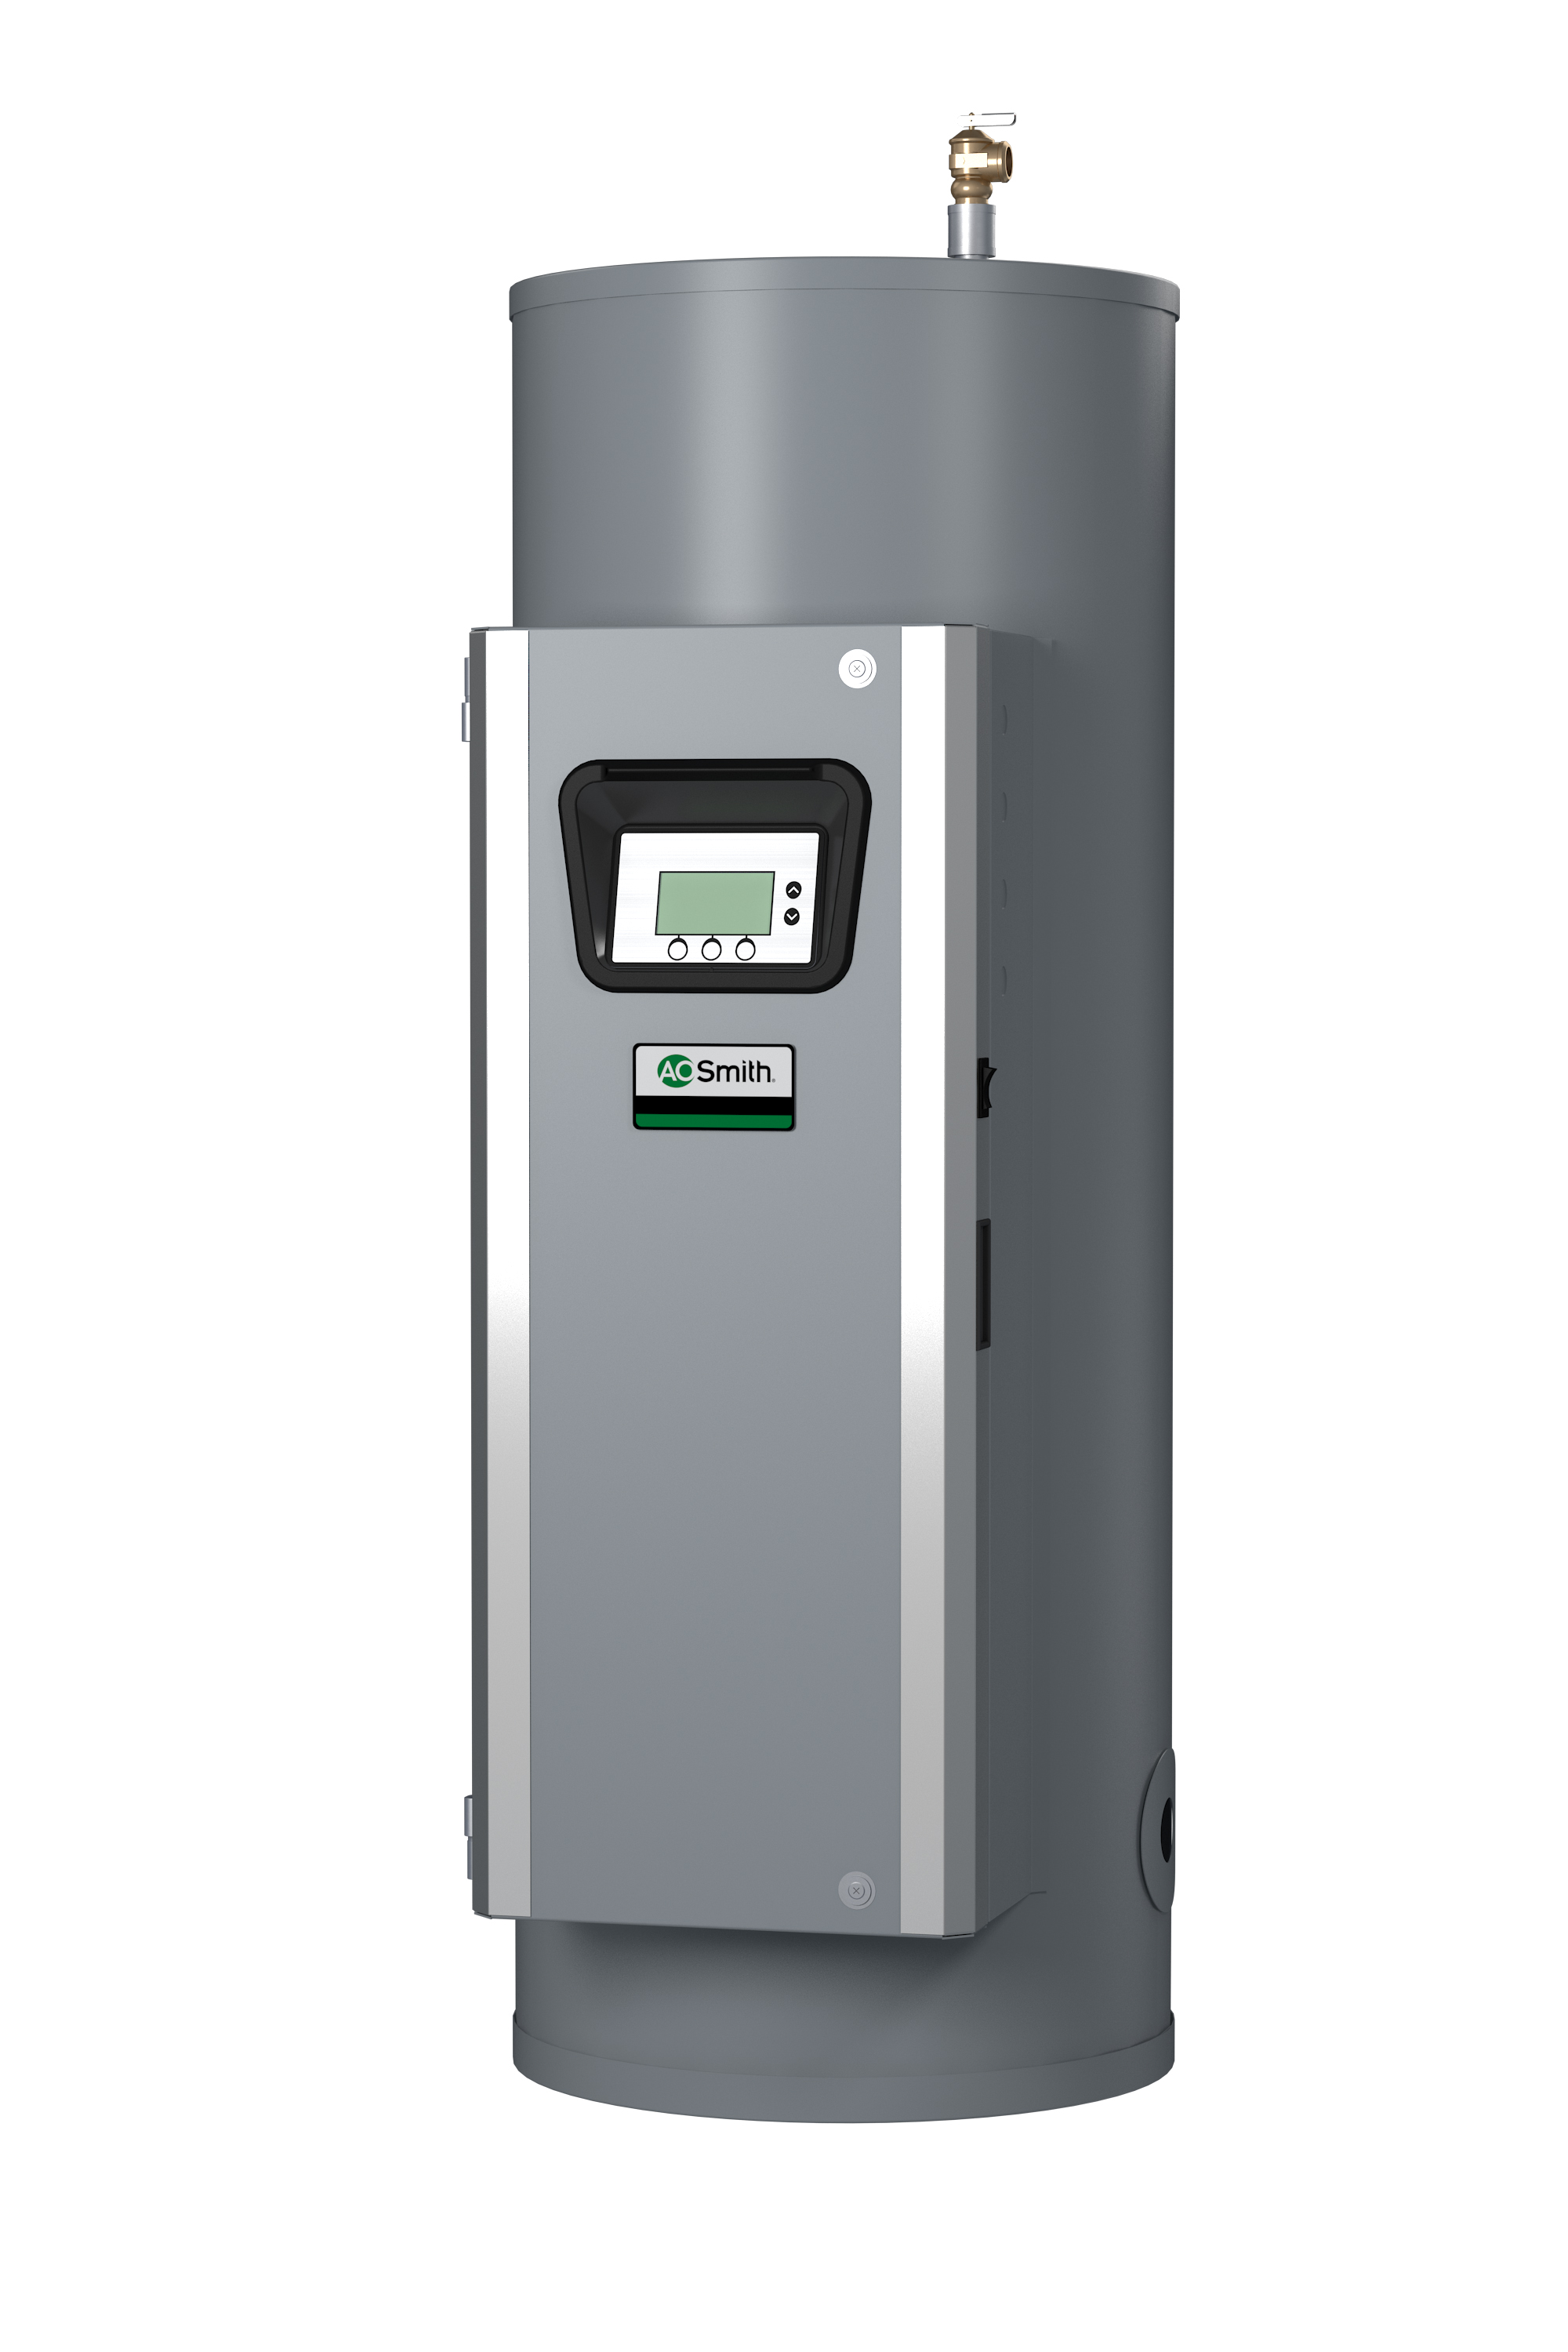 AO SMITH DSE-100A-18: 100 GALLONS, 18KW, 208 VOLT, 86.5 AMPS, 1 PHASE, 1 ELEMENT, ASME CUSTOM Xi SERIES HEAVY DUTY COMMERCIAL ELECTRIC WATER HEATER